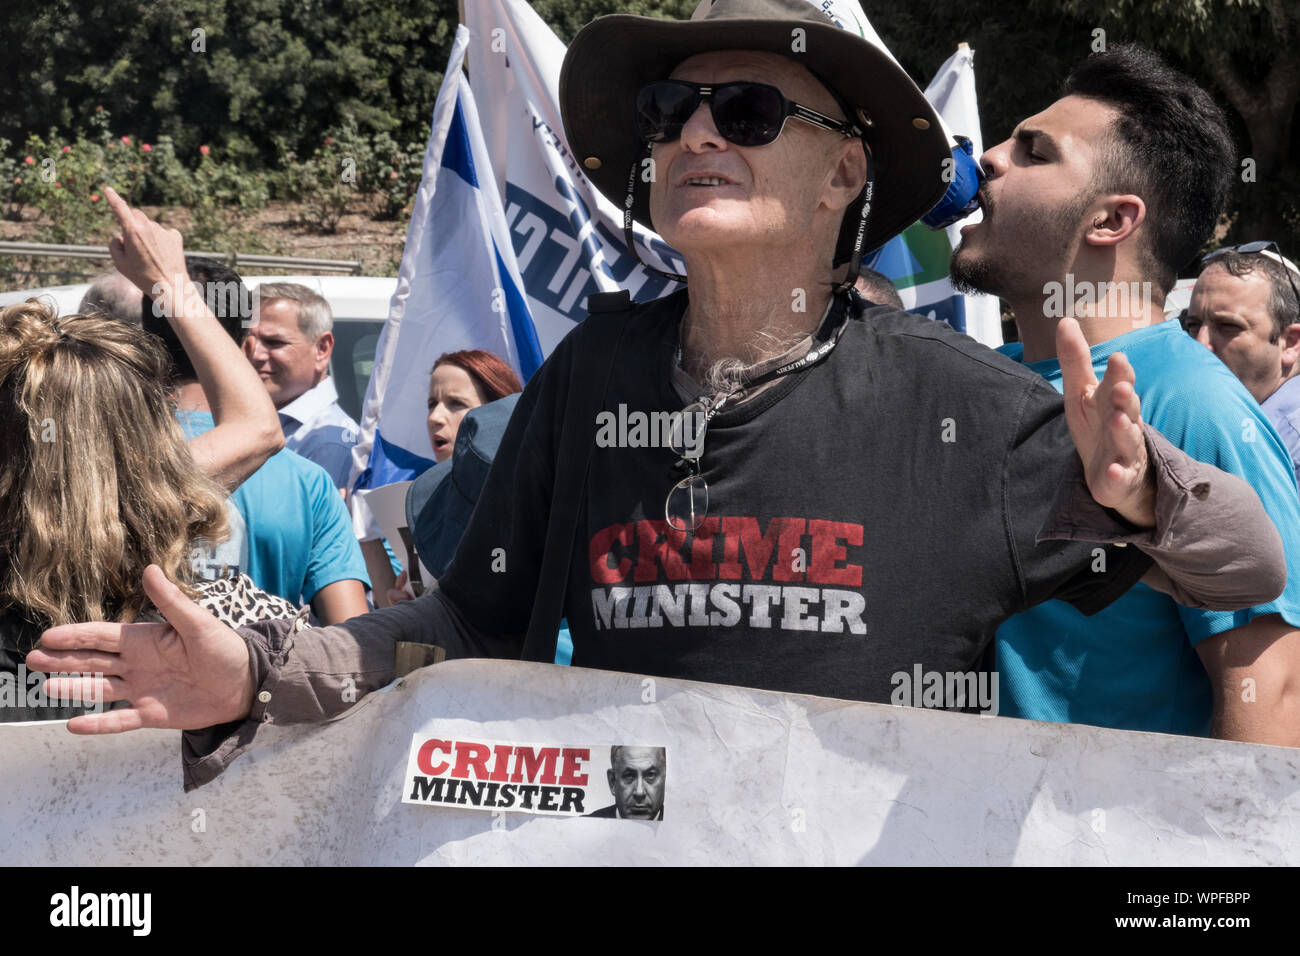 Jerusalem, Israel. 9th September, 2019. Democratic Union activists block the access road to the Israeli Parliament protesting against PM Netanyahu citing criminal suspicions, immoral campaigning and a blitz attempt to legislate the allowance of cameras inside election ballot booths. An assortment of political parties demonstrated in front of the Israeli Parliament building with similar messages ahead of round two of the national elections for parliament scheduled for 17th September, 2019. Credit: Nir Alon/Alamy Live News. Credit: Nir Alon/Alamy Live News Stock Photo